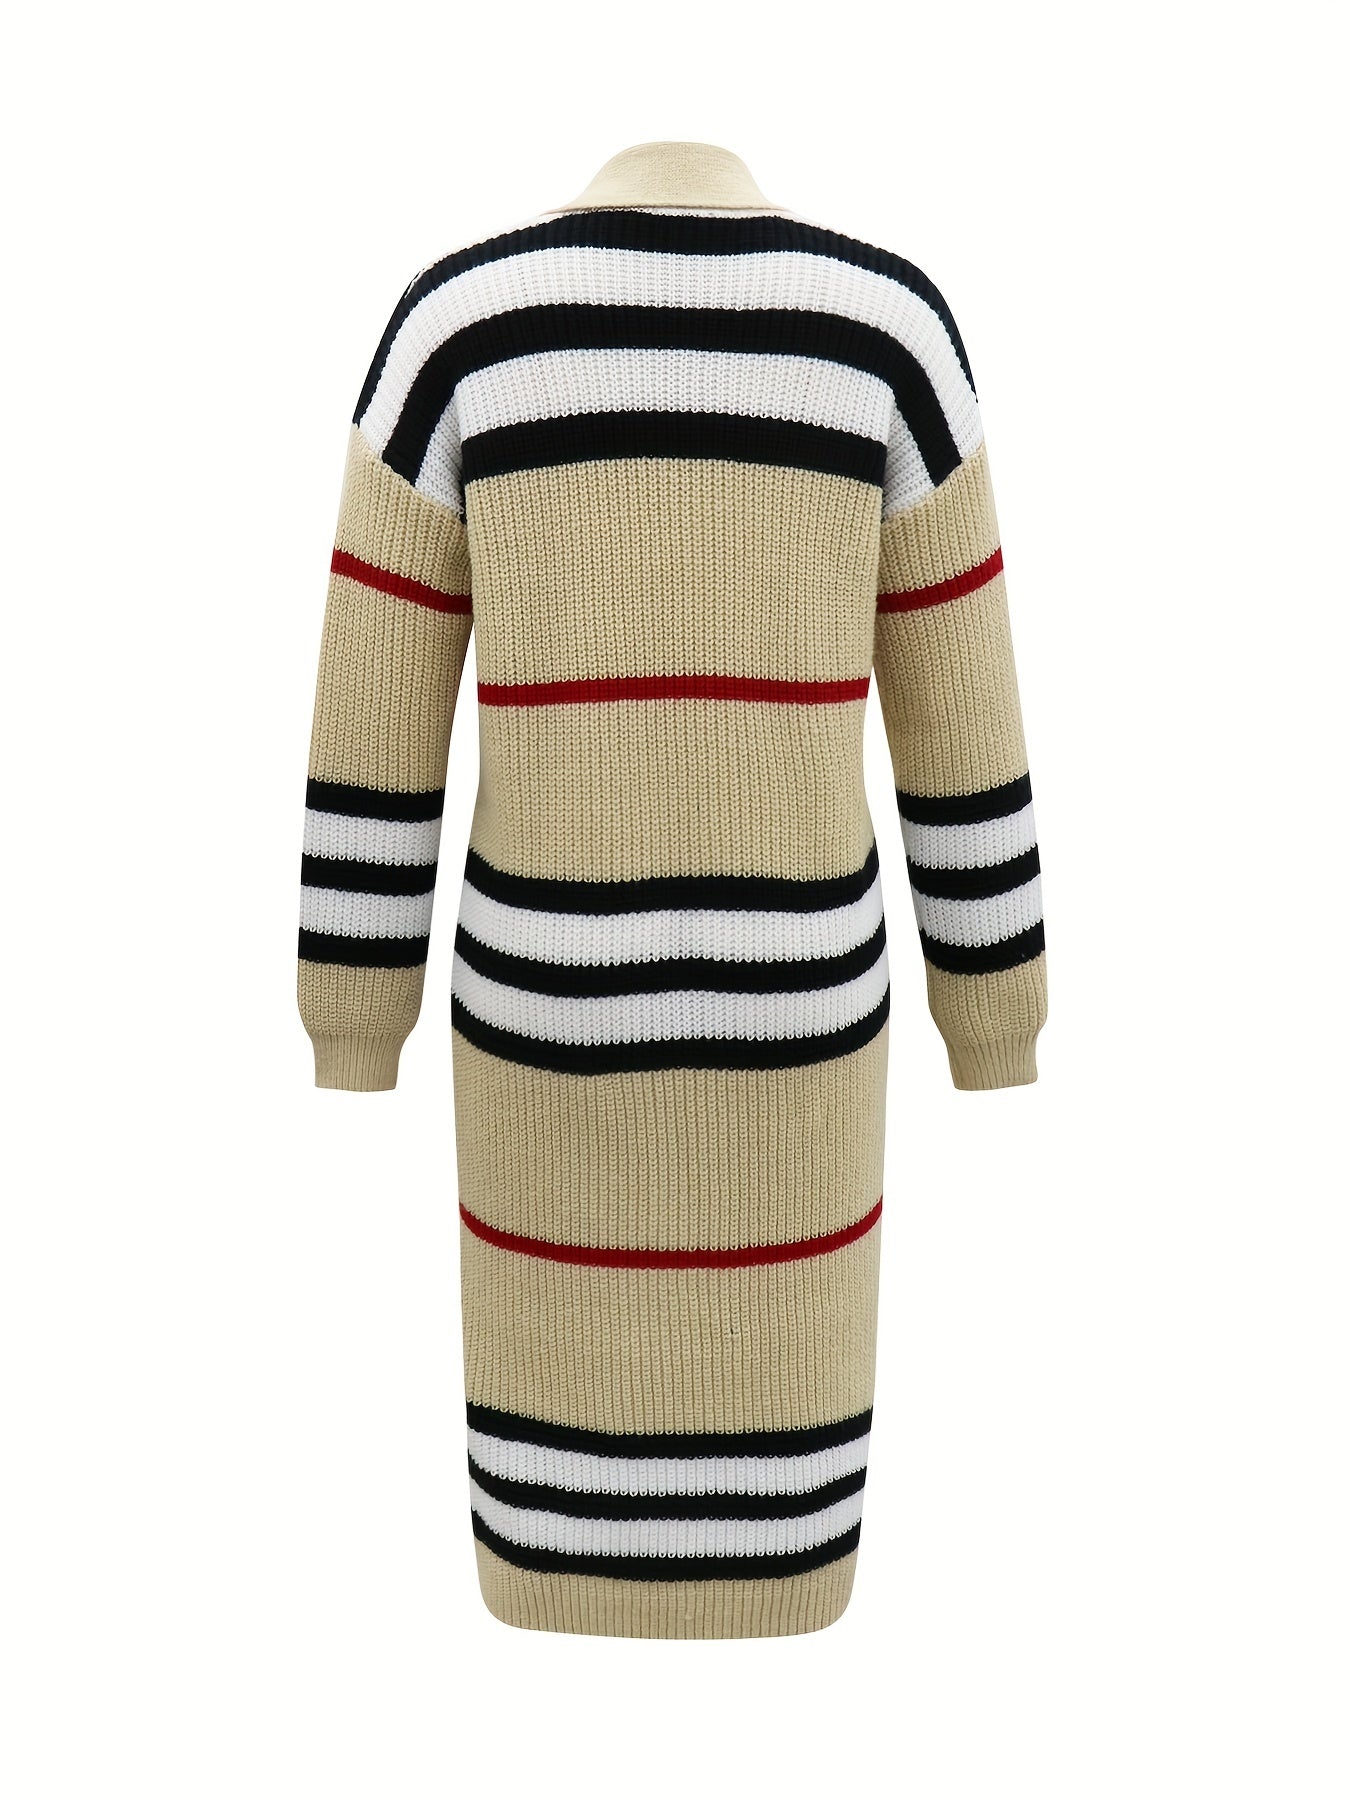 Antmvs Striped Pattern Open Front Cardigan, Casual Long Sleeve Long Length Cardigan For Fall & Winter, Women's Clothing